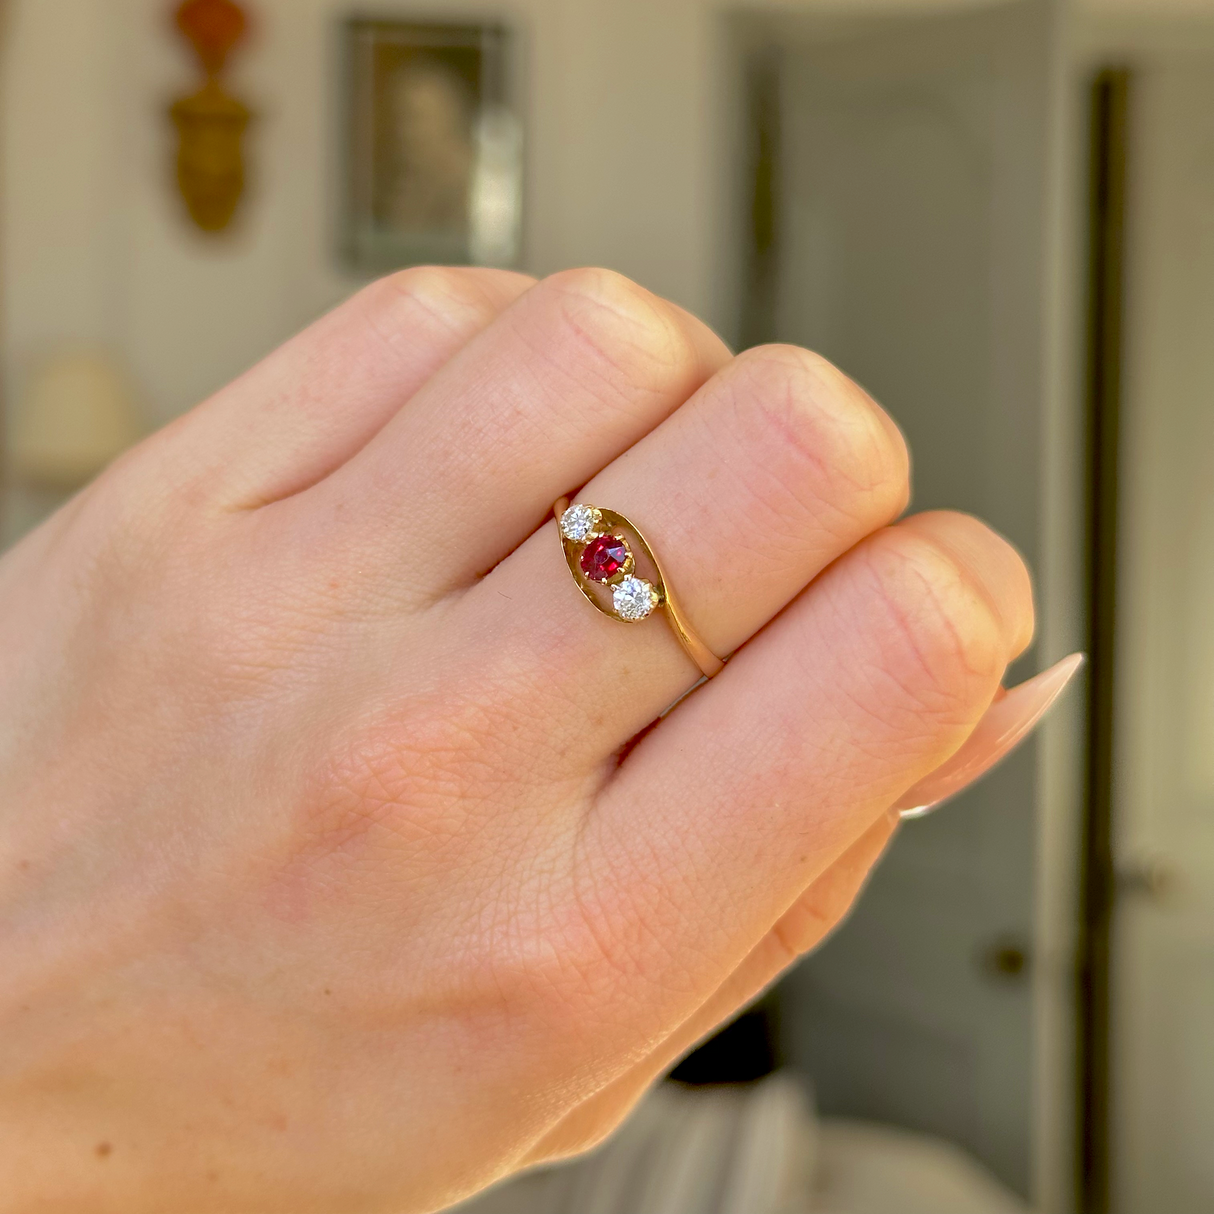 Antique, Three-Stone Ruby and Diamond Engagement Ring, 18ct Yellow Gold worn on closed hand. 